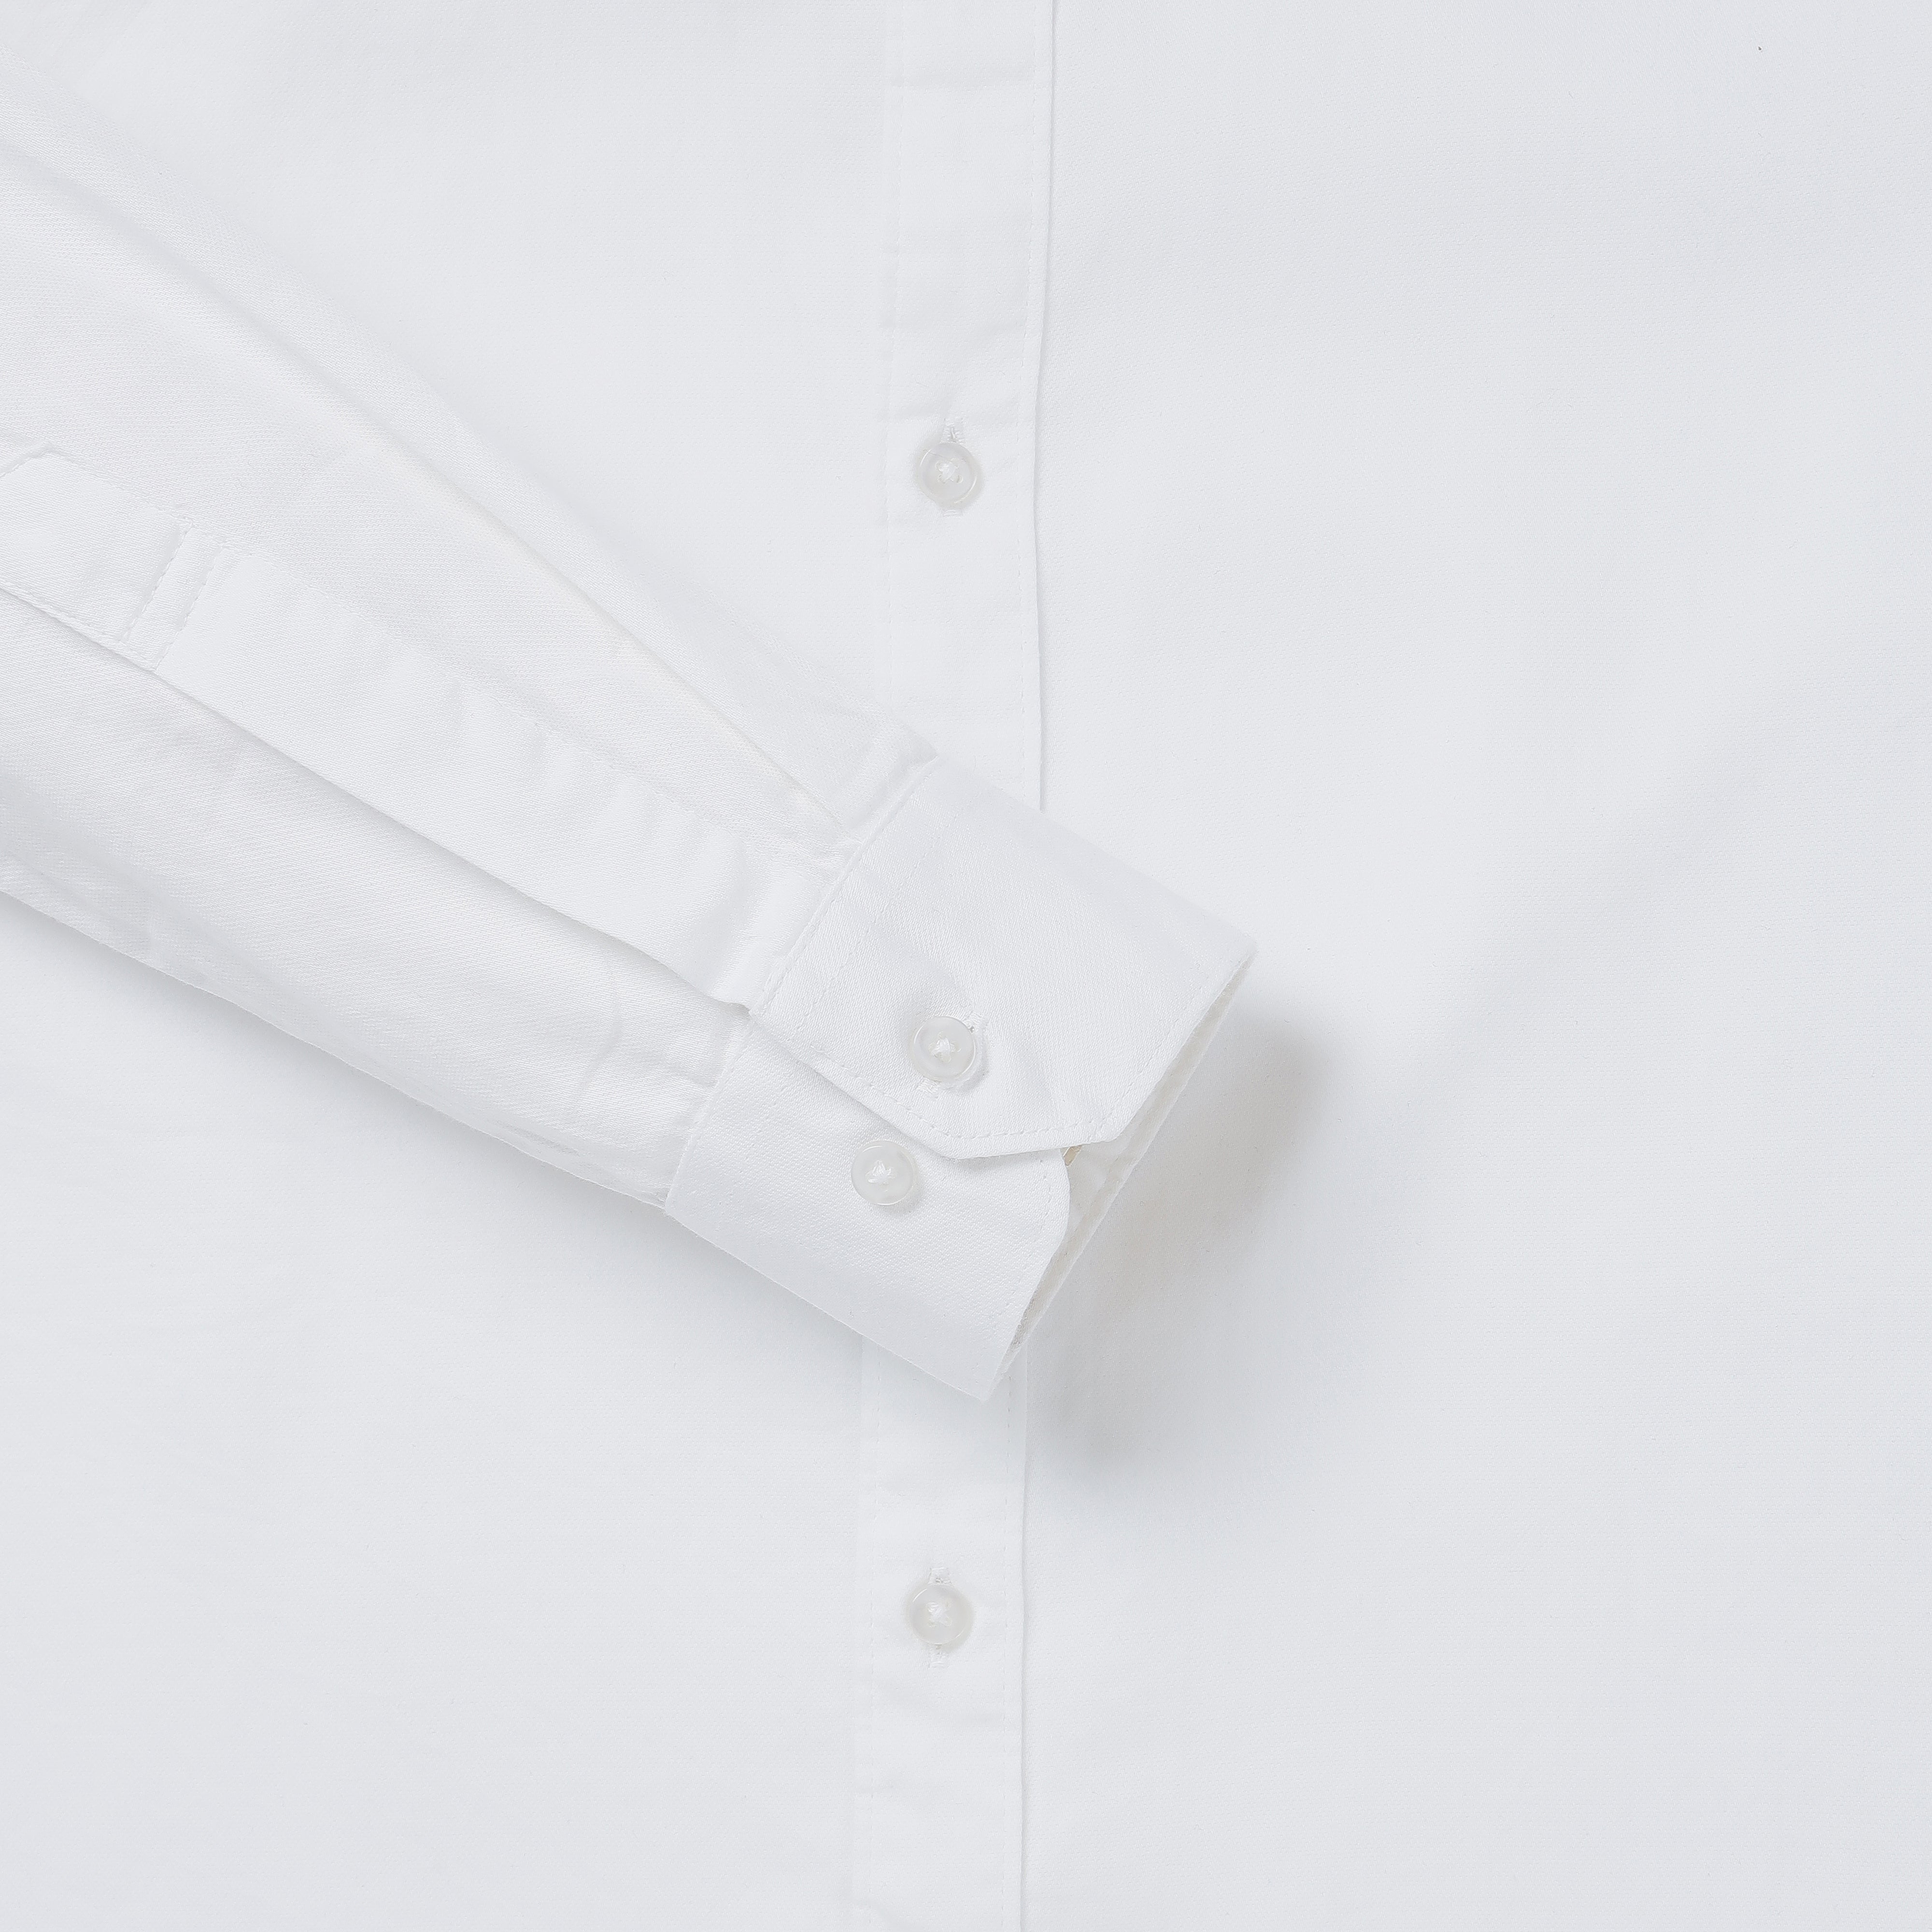 WHITE SOLID COTTON FULL SLEEVE SHIRT (GP076)